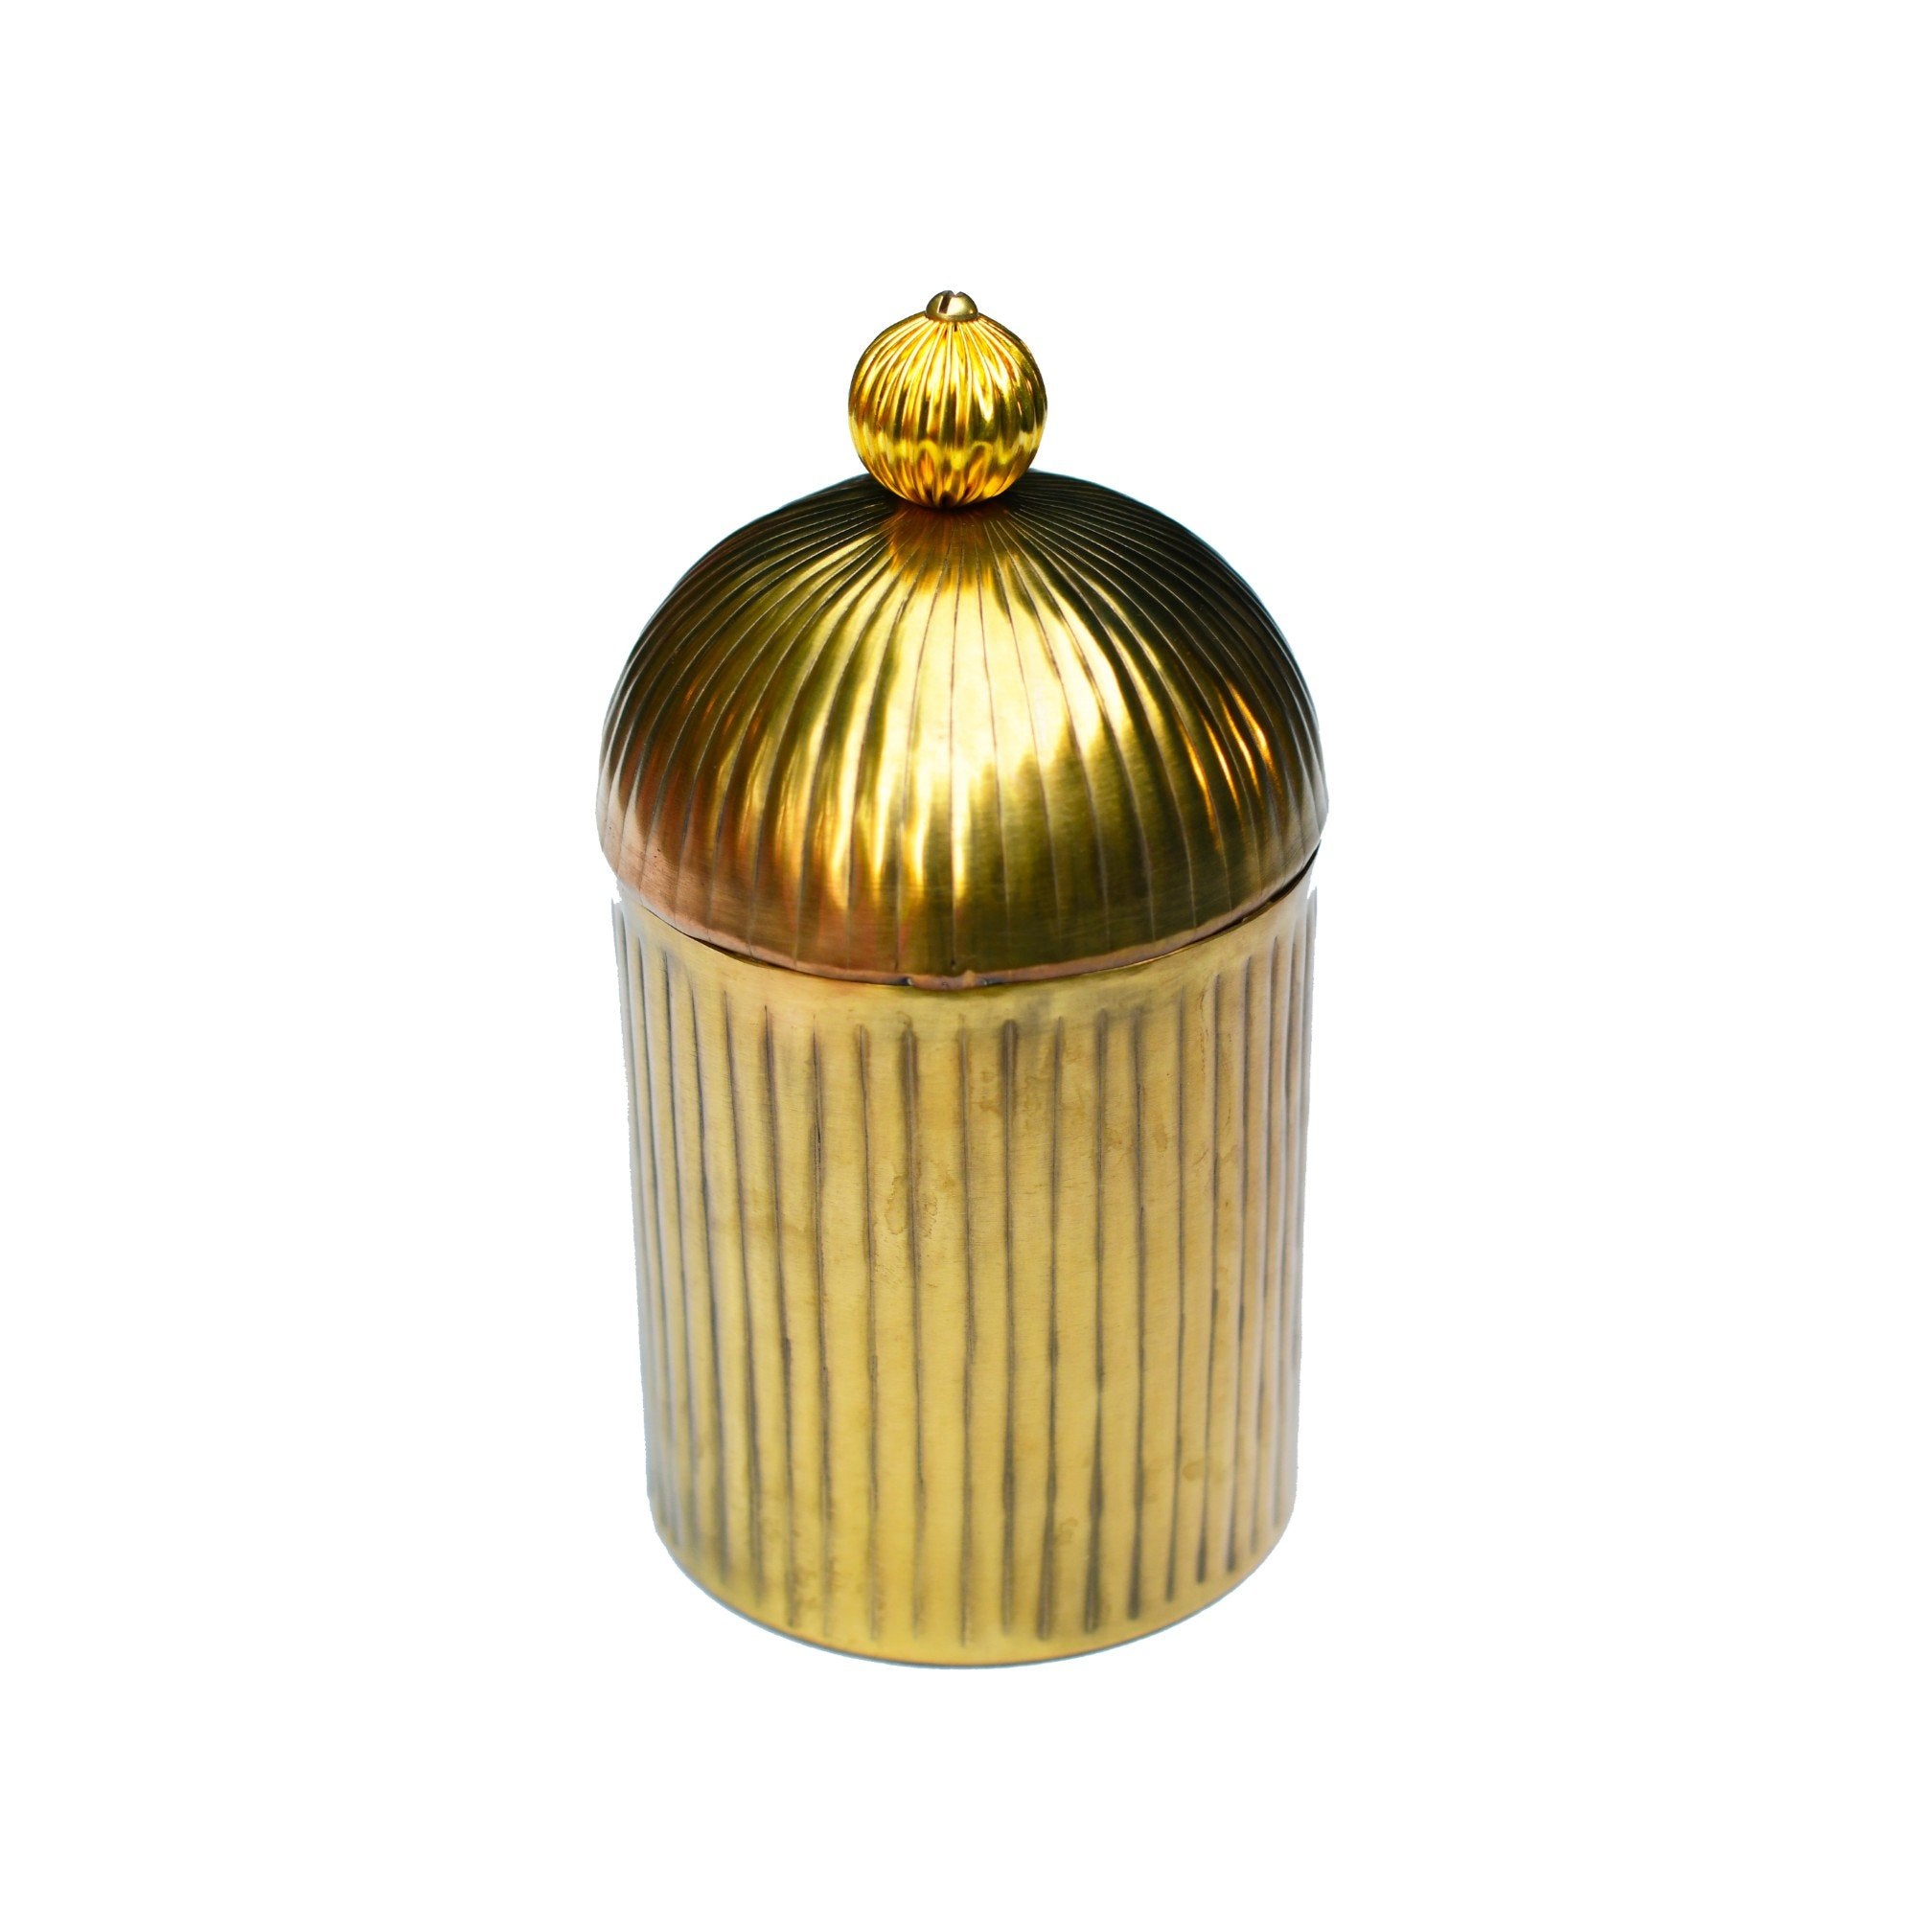 Decorative Ribbed Metal Jar with Dome Lid in Antique Gold Finish - 2 sizes 1 BHK Interiors